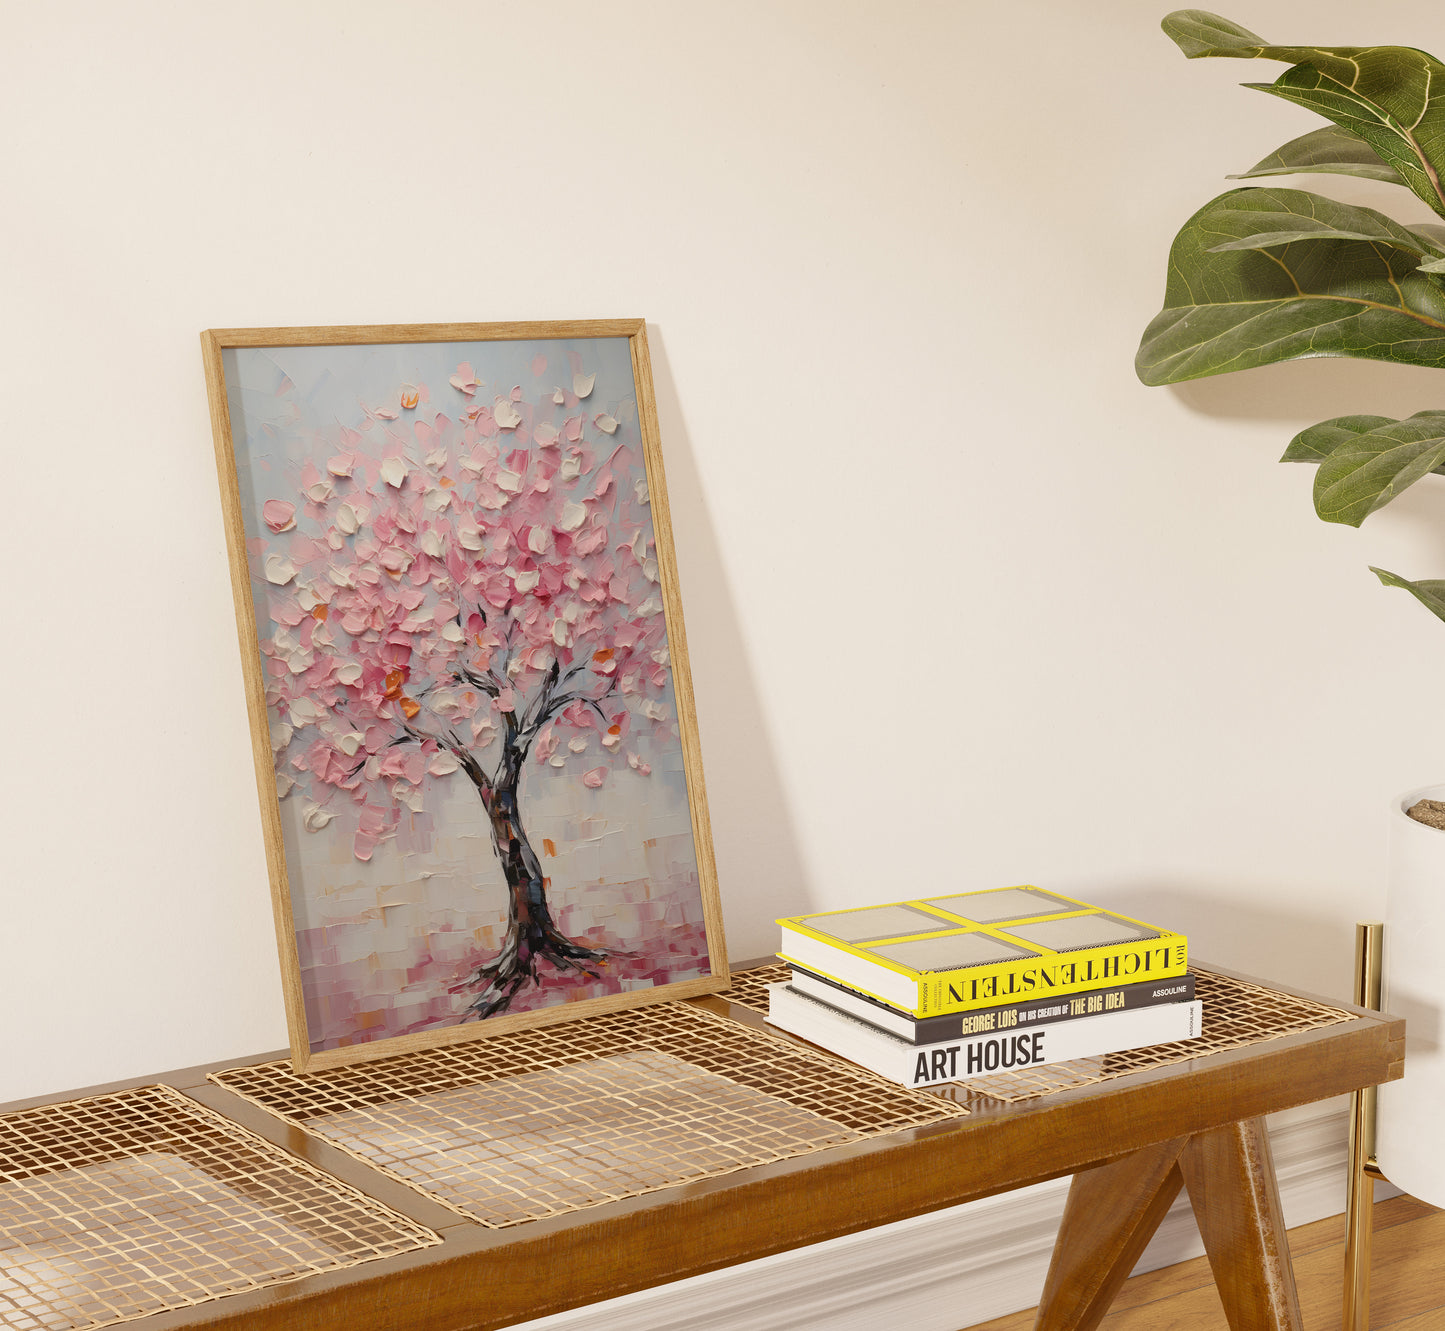 A framed painting of a cherry blossom tree beside books on a console table.